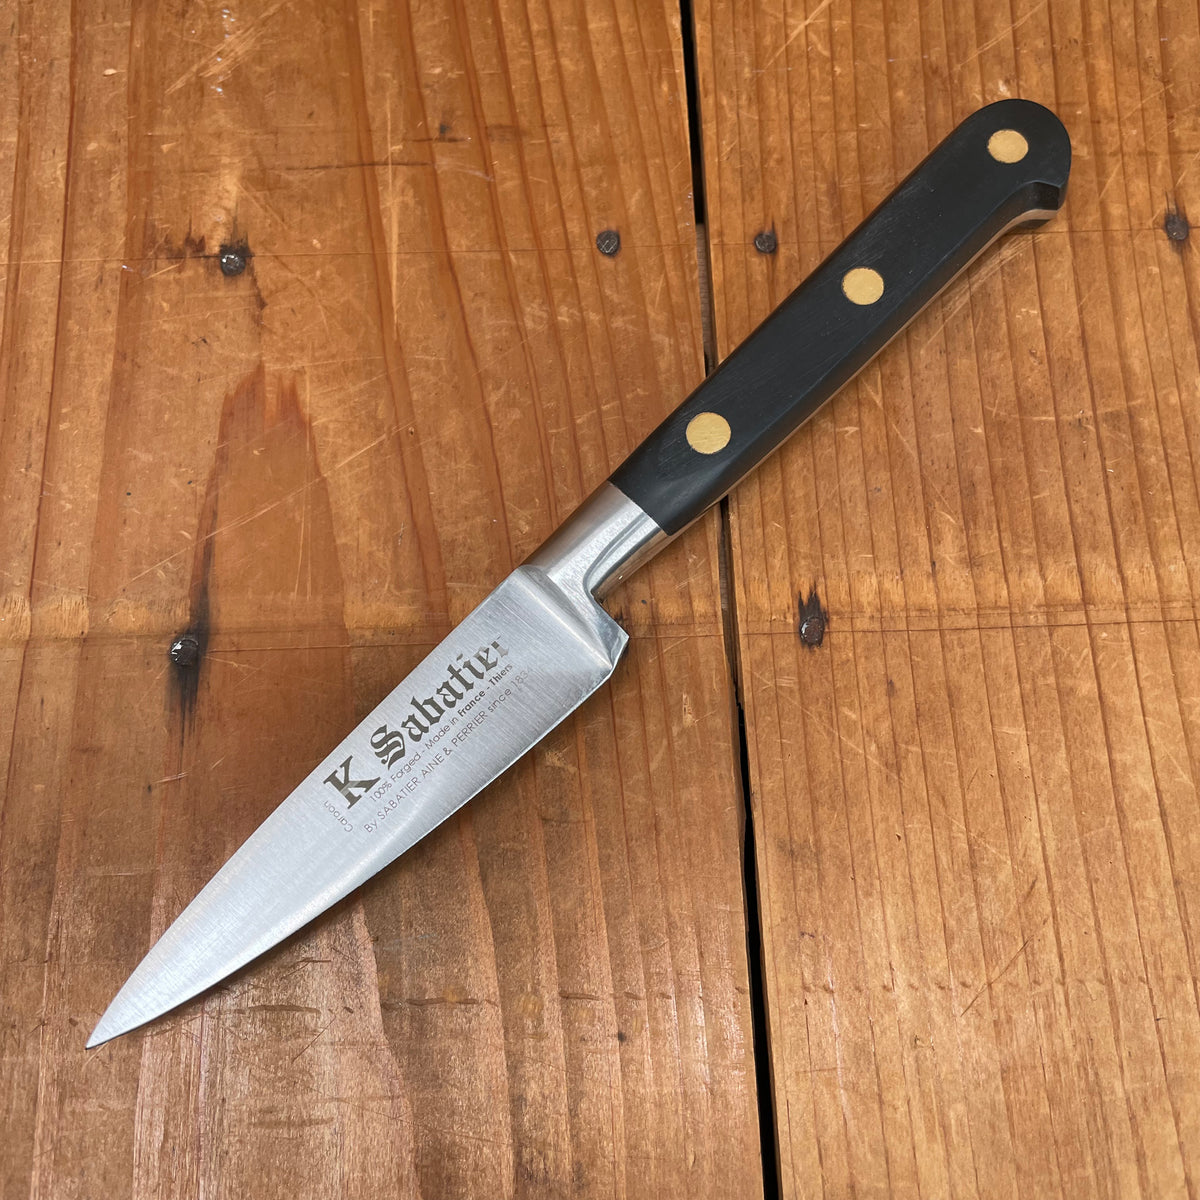 Steelport Carbon Steel Paring Knife with Sheath